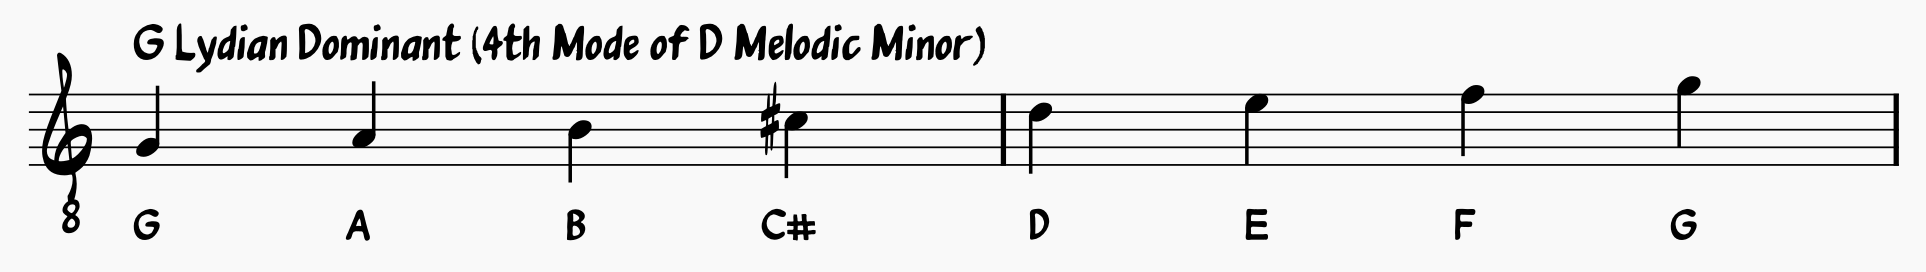 G Lydian Dominant (4th mode of D melodic minor)